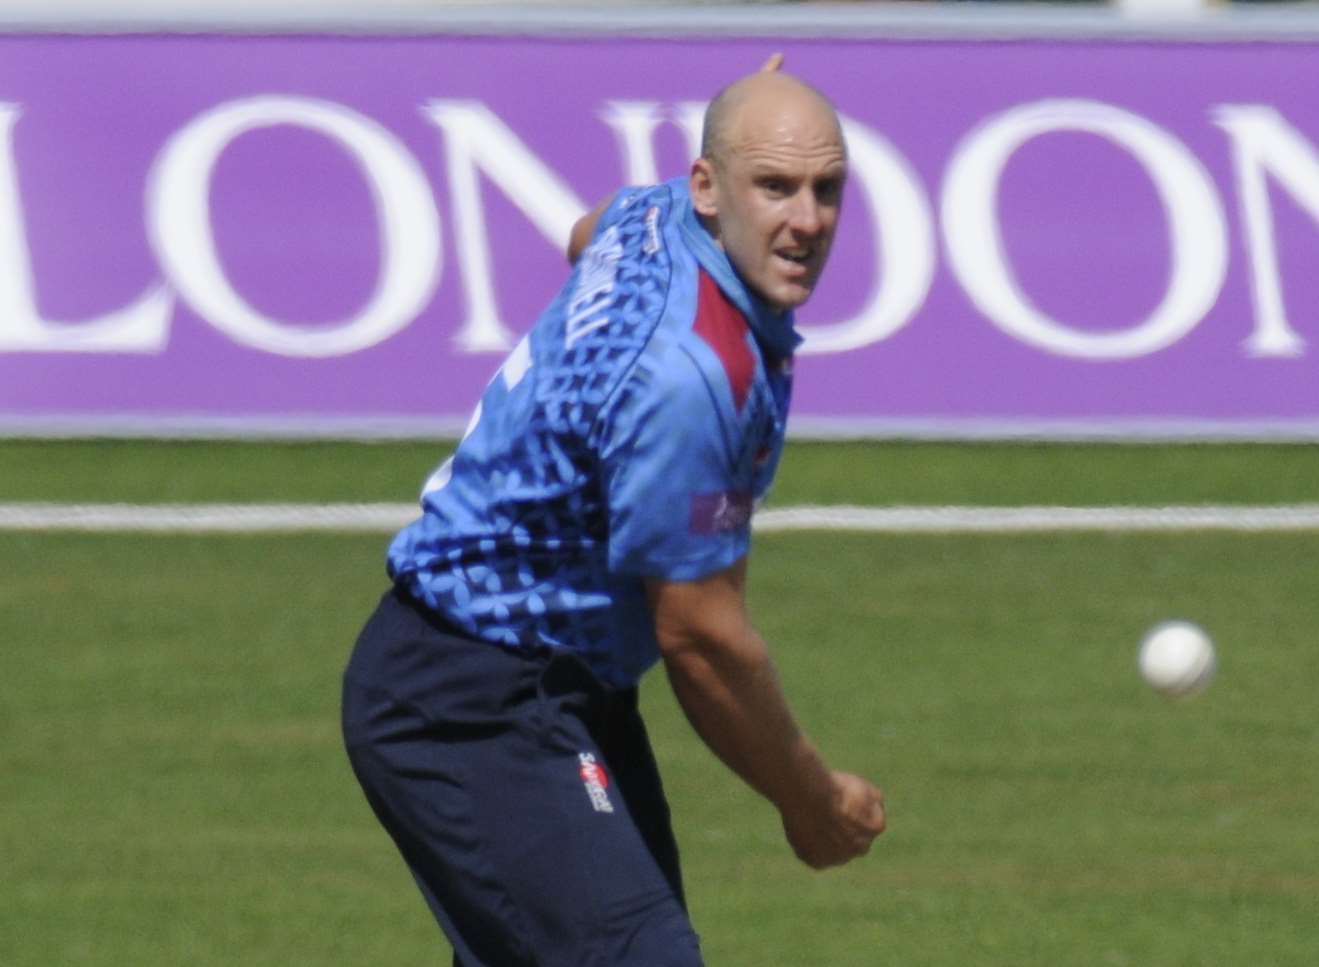 James Tredwell took 3-47 off his 10 overs against Surrey